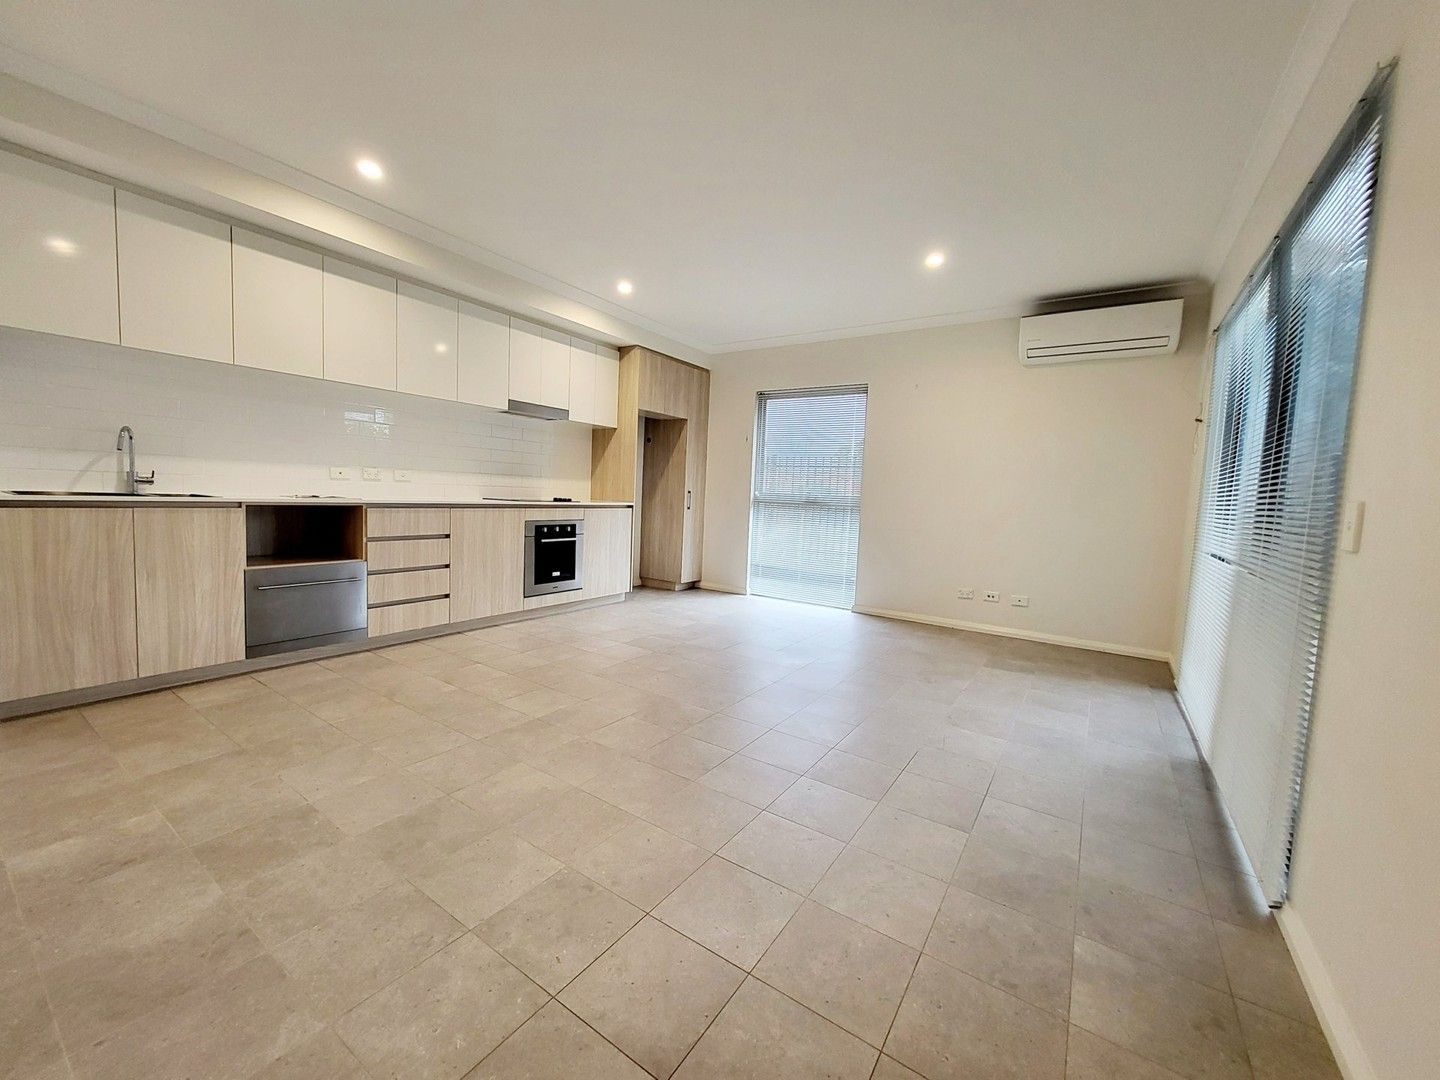 2 bedrooms Apartment / Unit / Flat in 10/114 Great Northern Highway MIDLAND WA, 6056